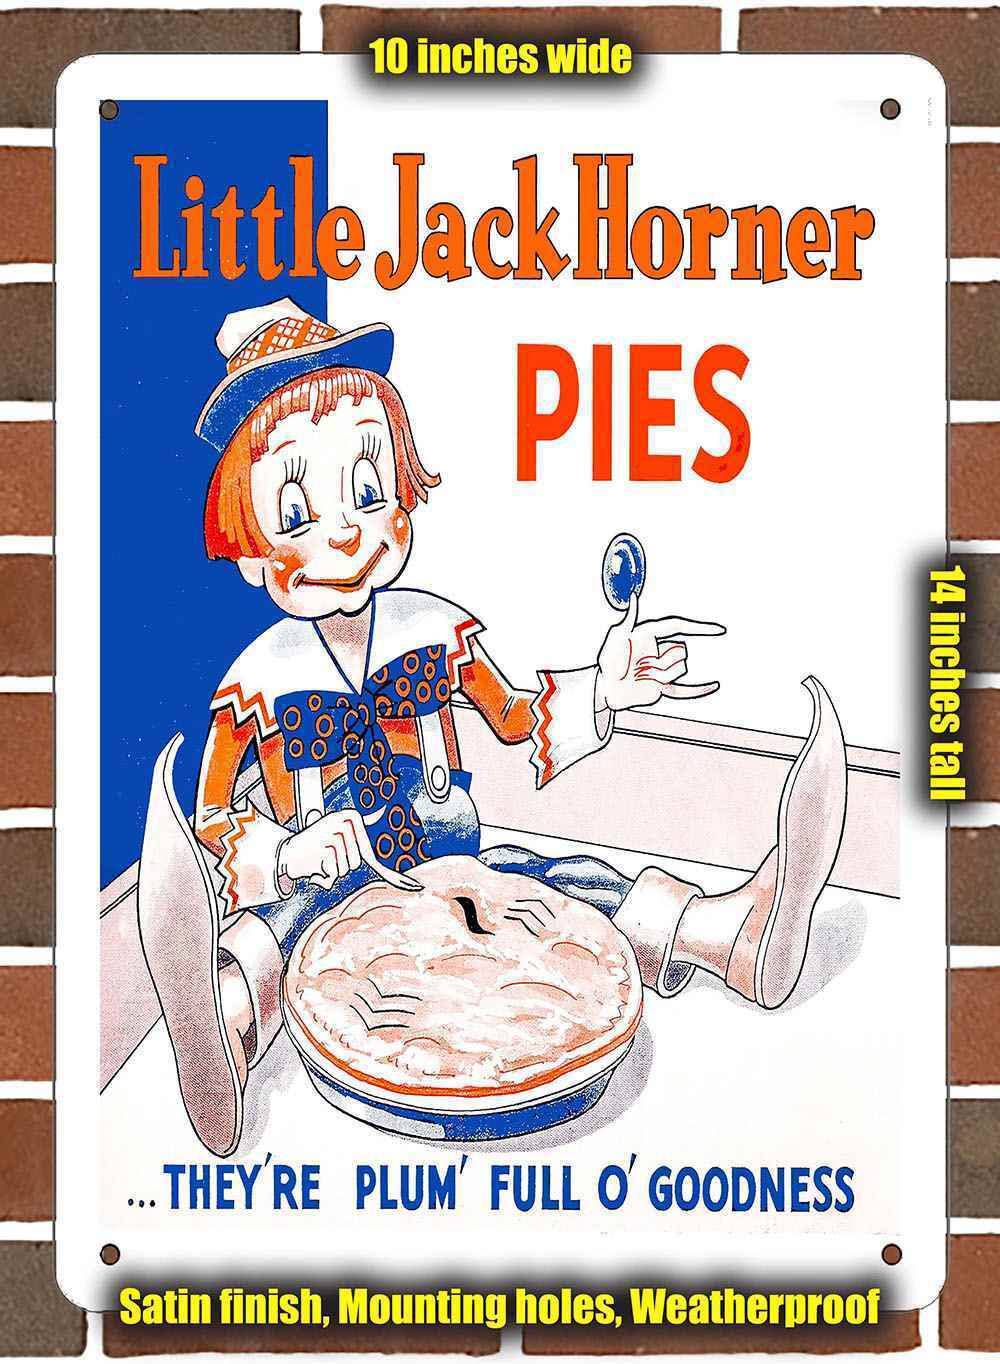 Metal Sign - 1946 Little Jack Horner Pies- 10x14 inches